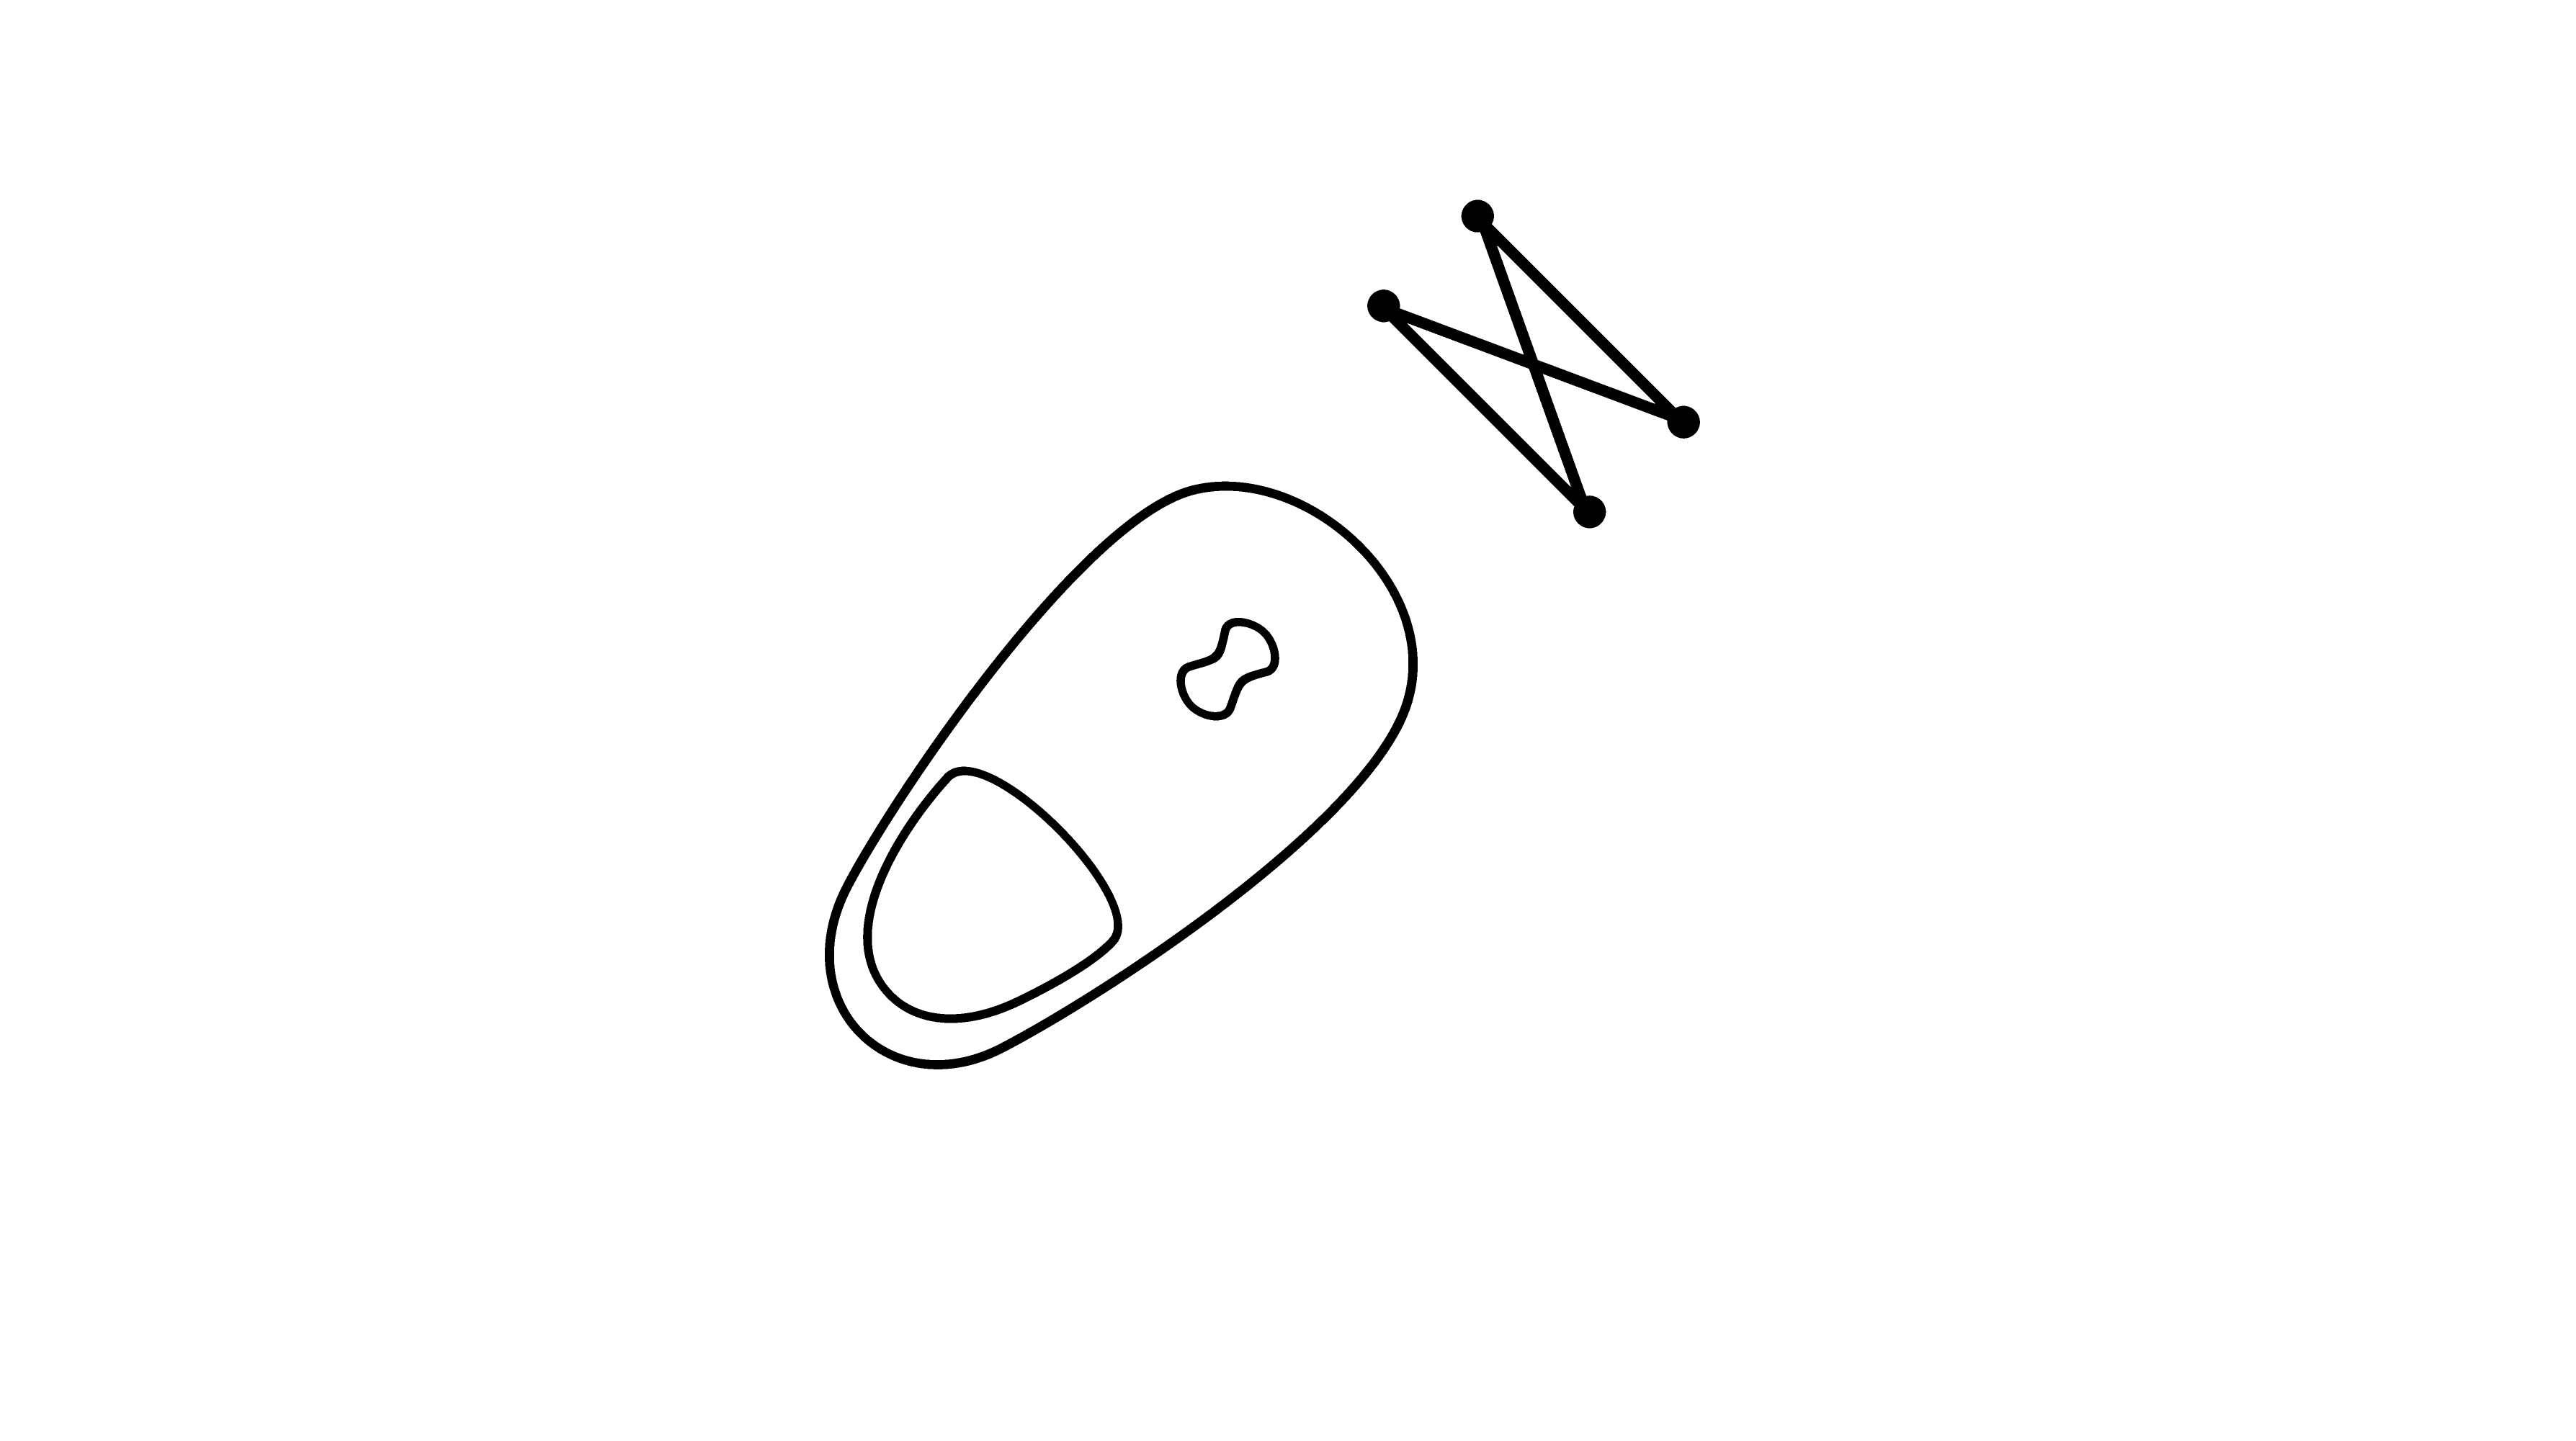 southwest raft and jeep water rentals logo